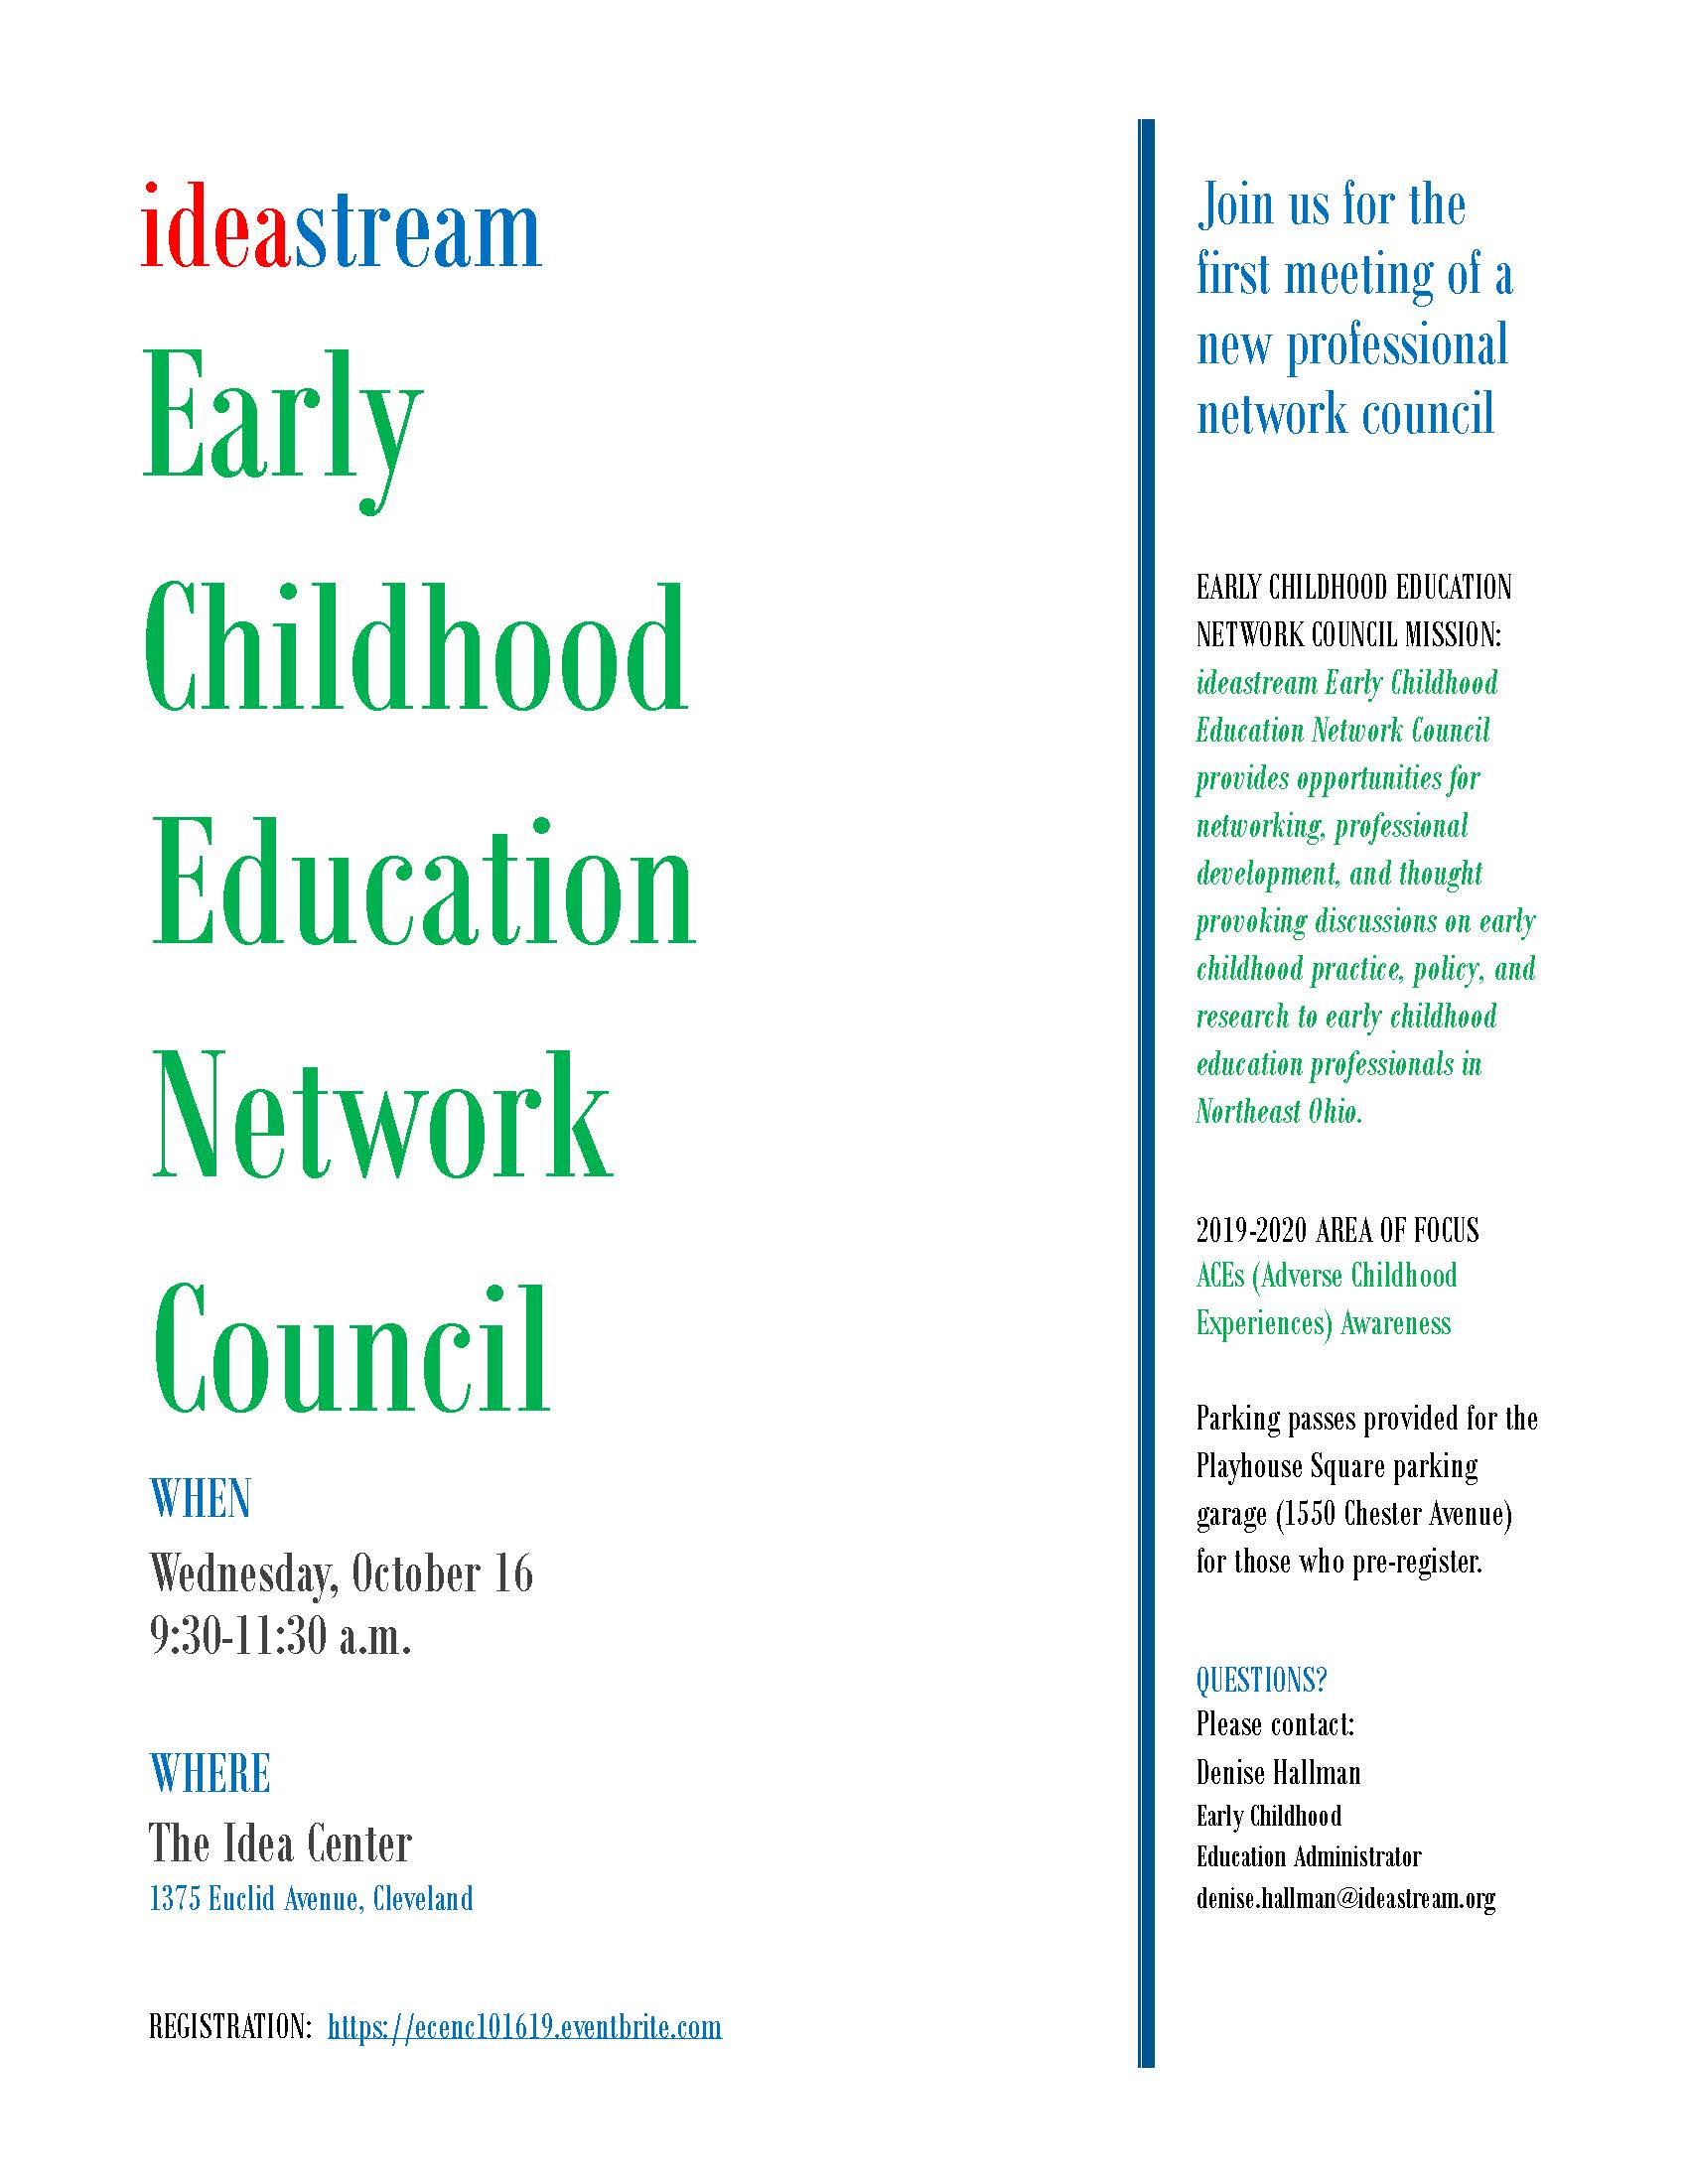 Early Childhood Education Network Council